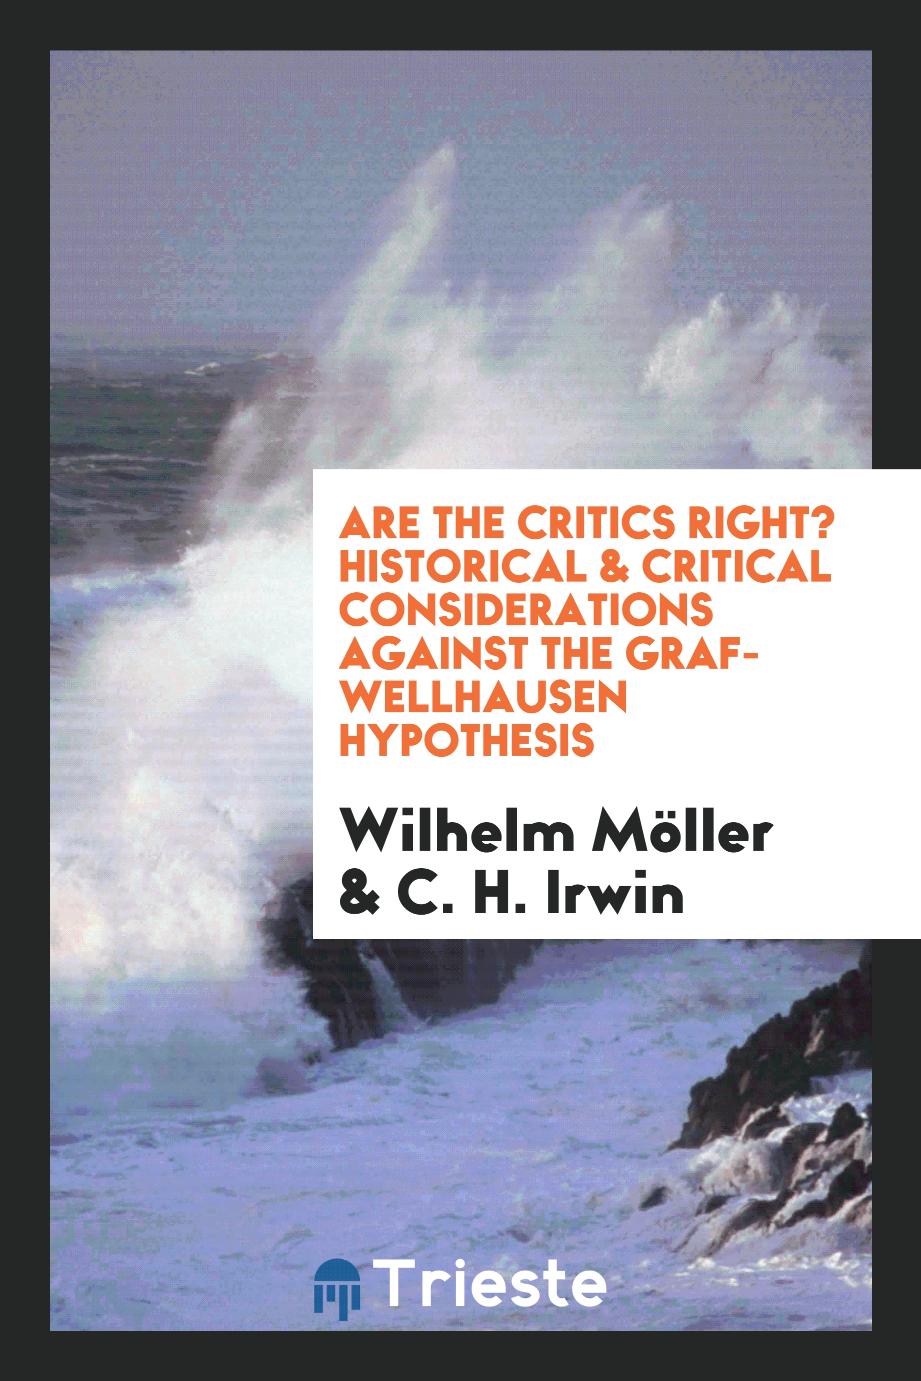 Wilhelm Möller, C. H. Irwin - Are the critics right? Historical & critical considerations against the Graf-Wellhausen hypothesis